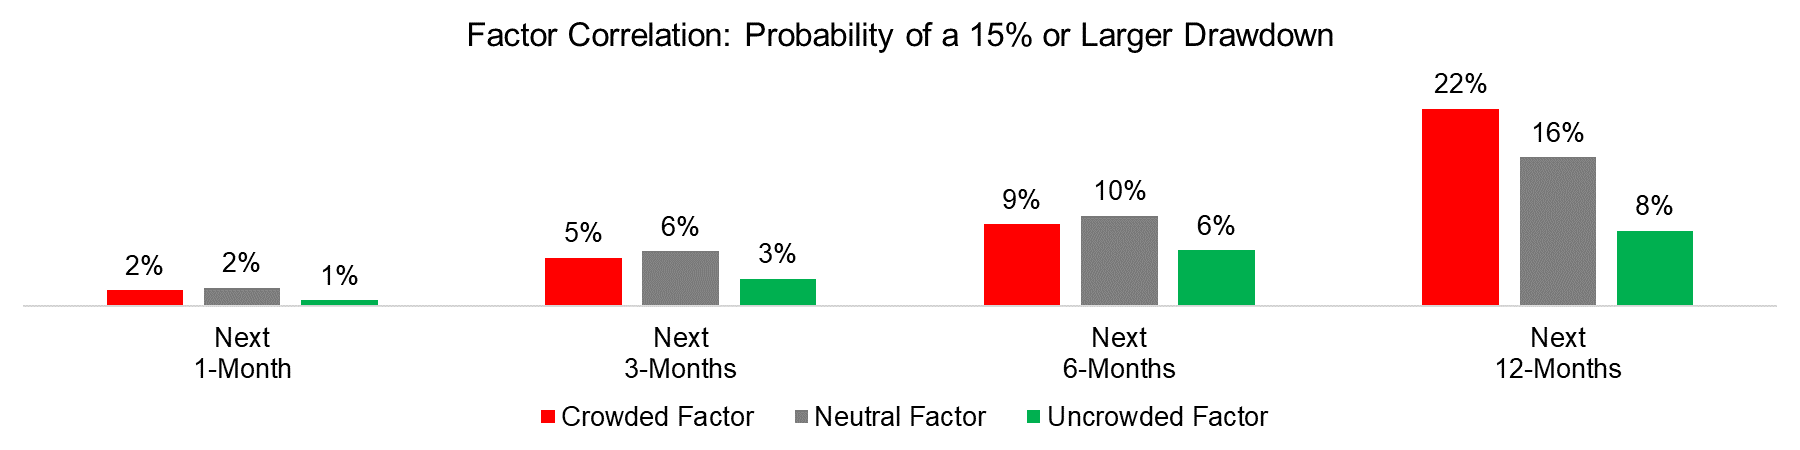 Factor Correlation Probability of a 15% or Larger Drawdown